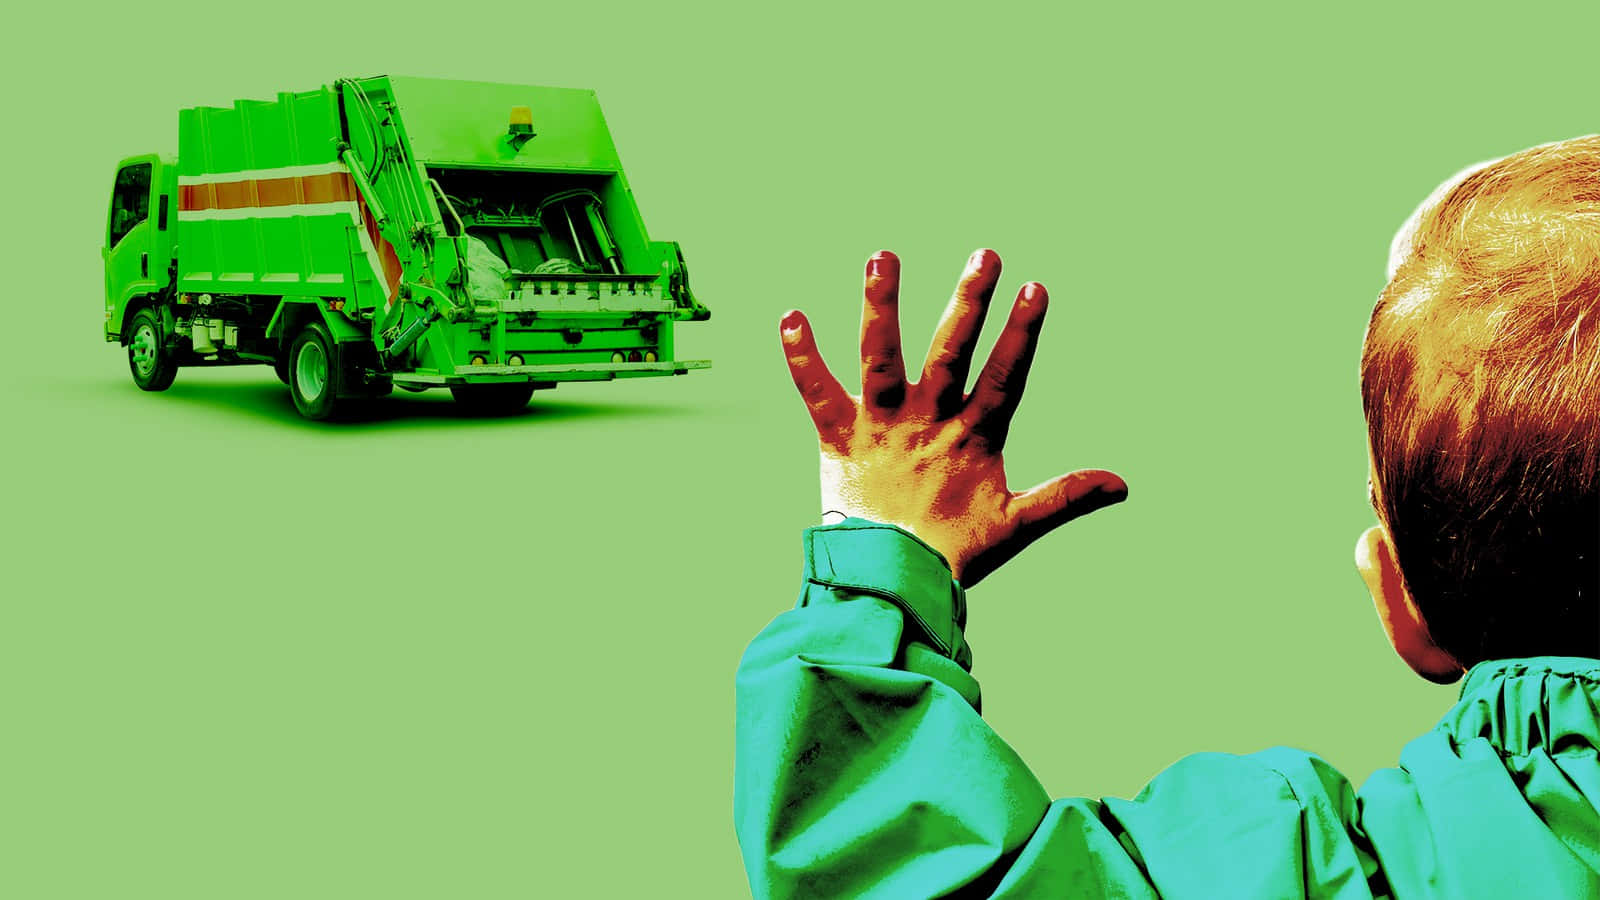 A Child Is Reaching Out To A Green Garbage Truck